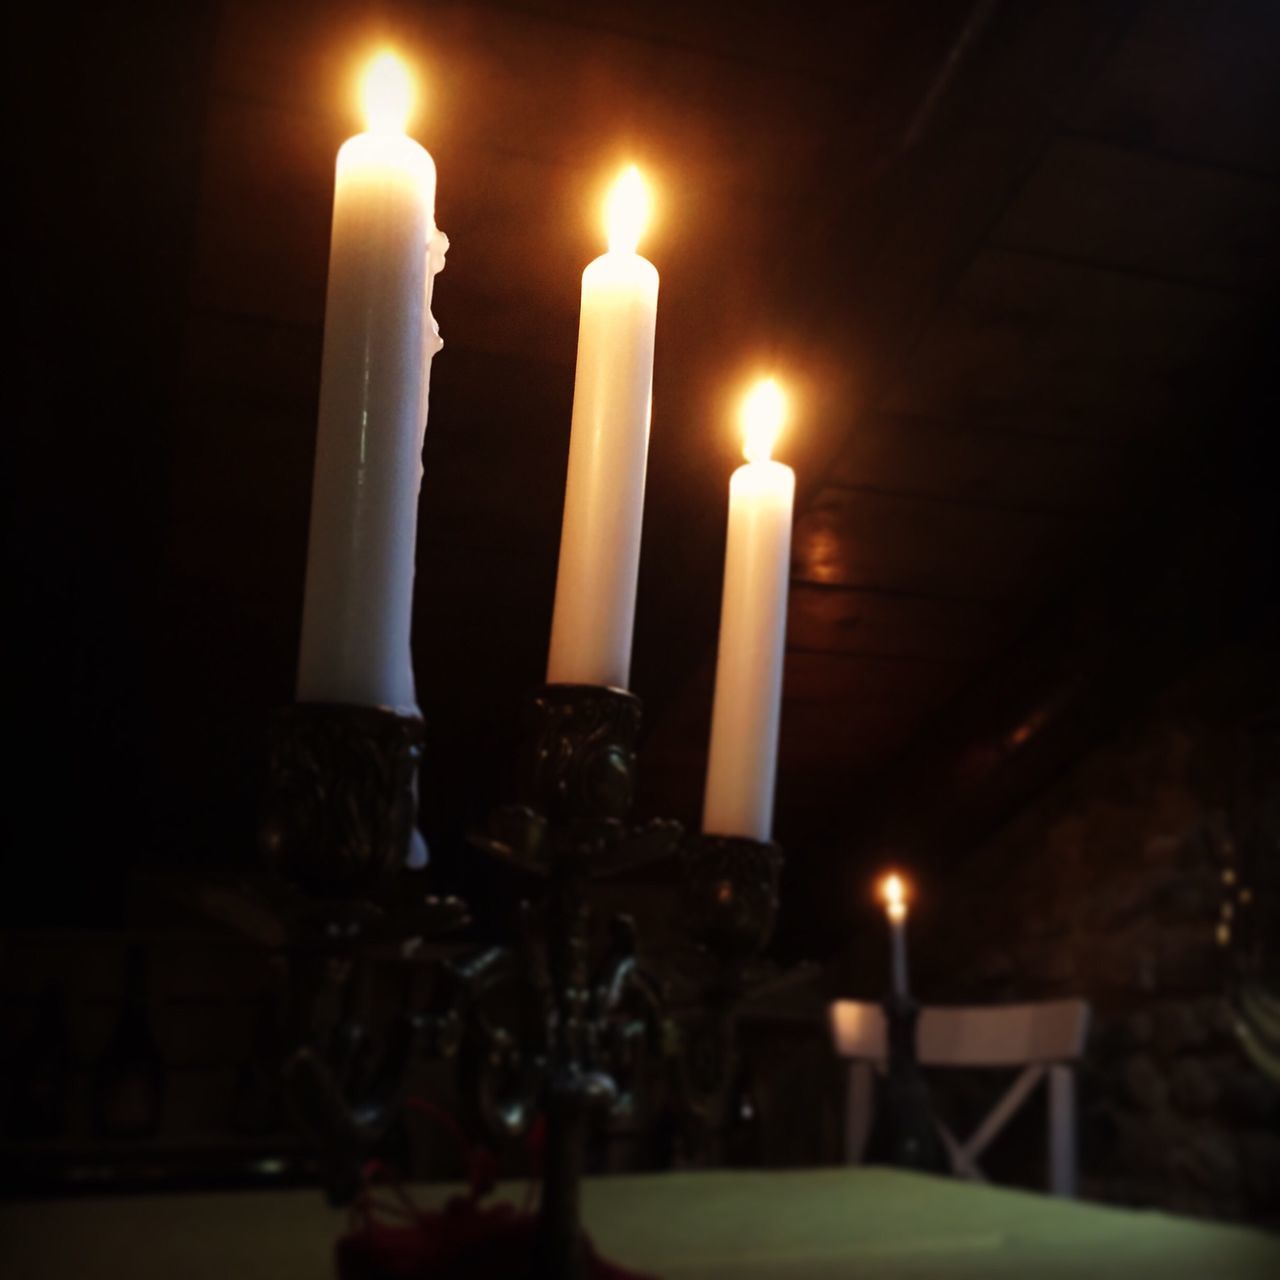 illuminated, candle, flame, indoors, burning, glowing, night, lit, heat - temperature, close-up, lighting equipment, fire - natural phenomenon, religion, candlelight, light - natural phenomenon, spirituality, selective focus, focus on foreground, dark, no people